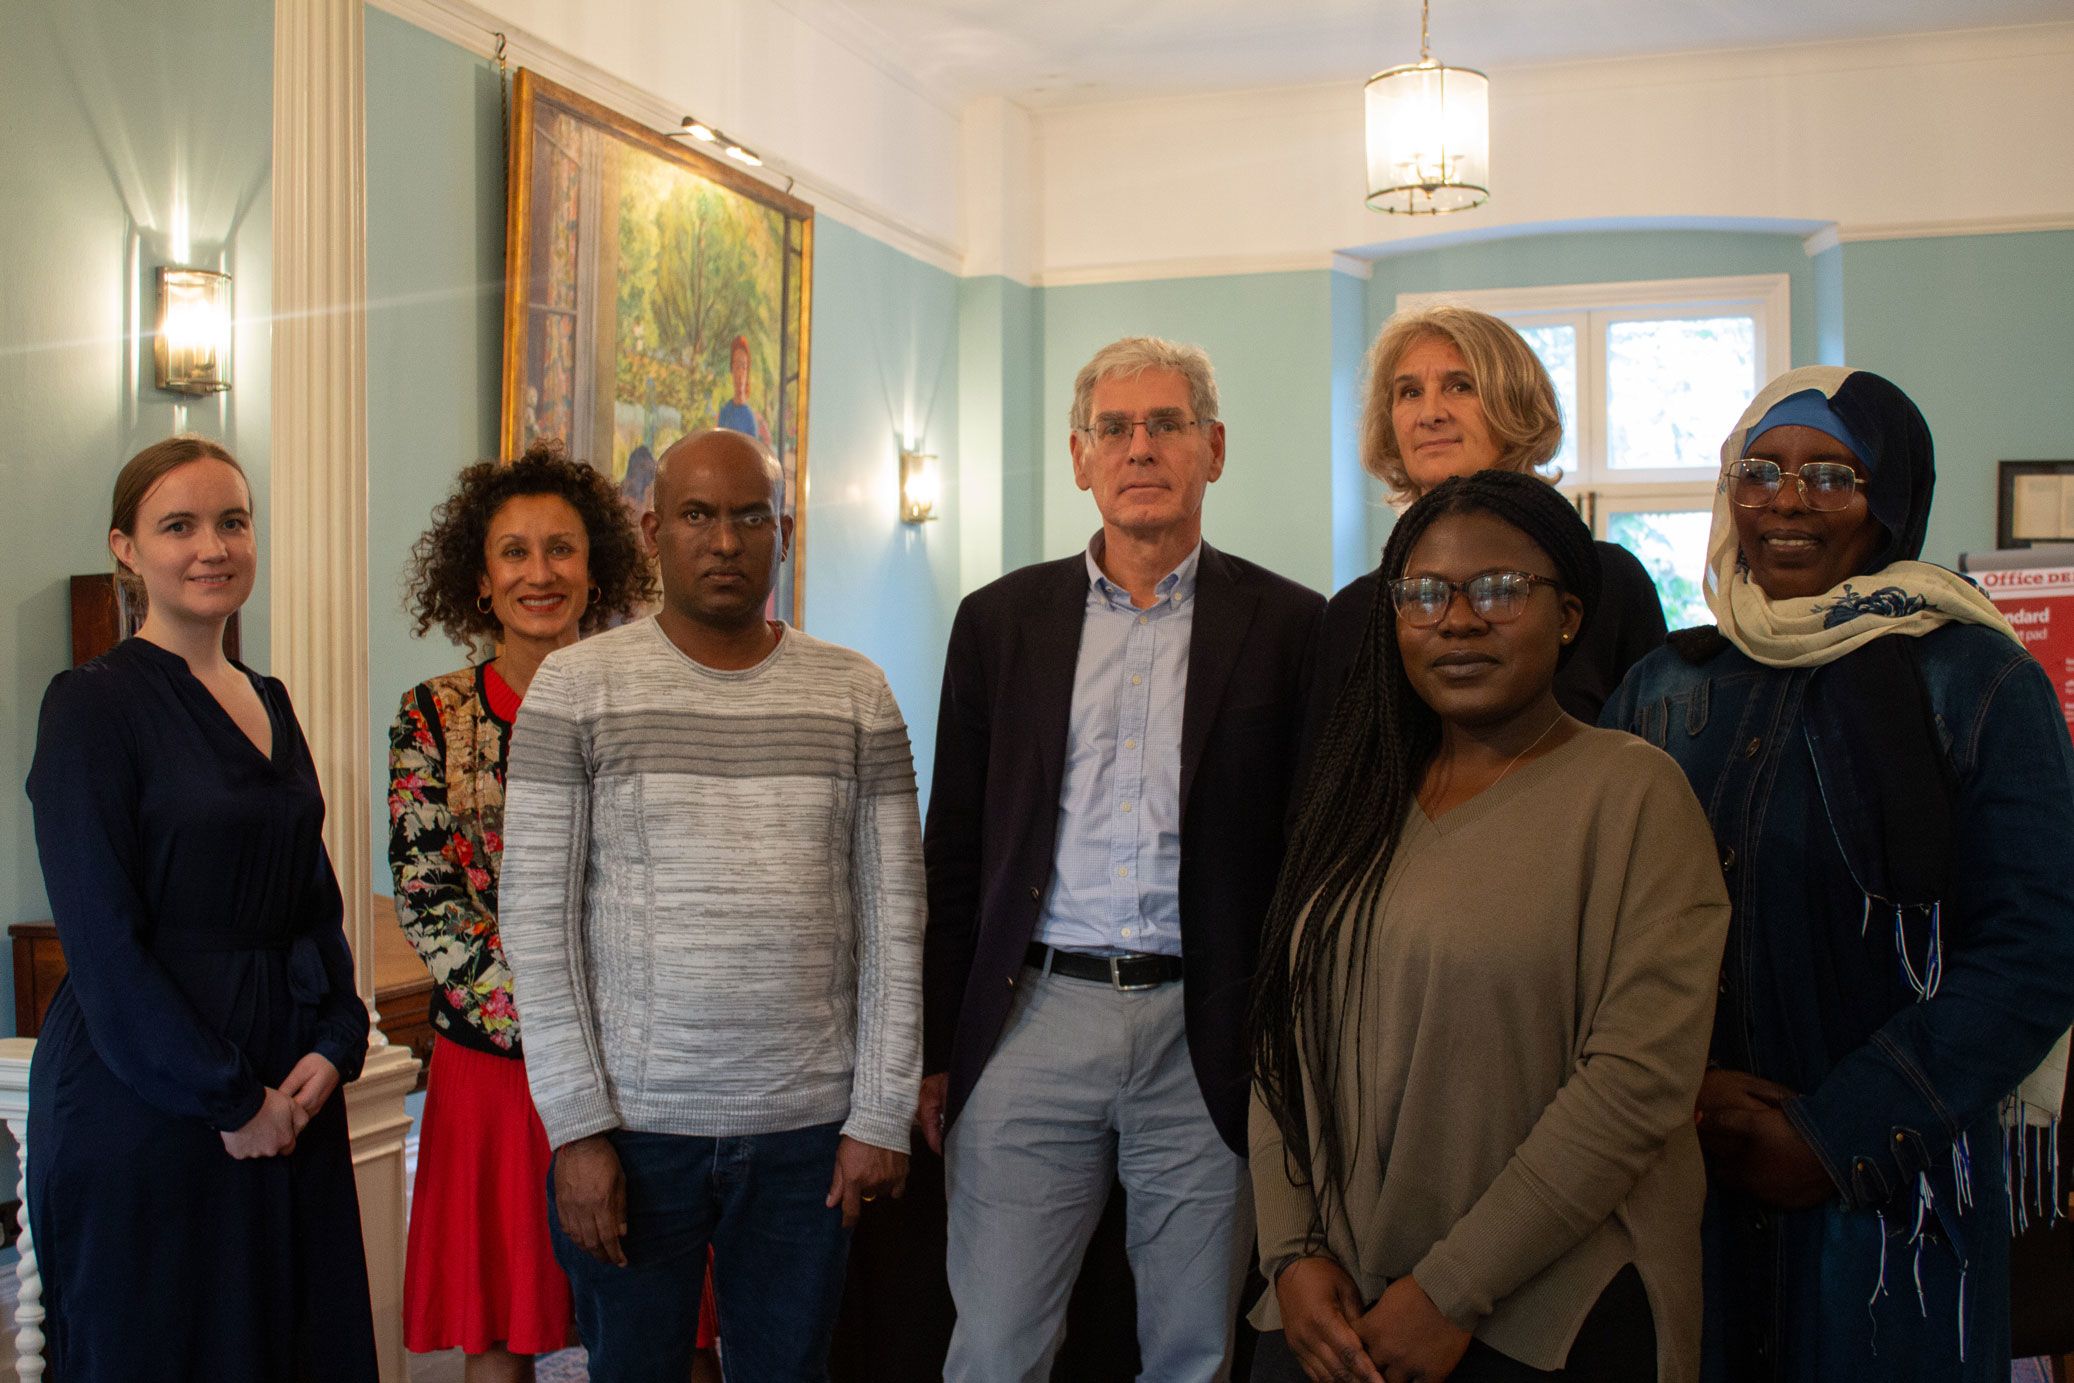 Muriel and Marcel Jongen with scholarship students from Birkbeck, in a group photo in the Keynes Library